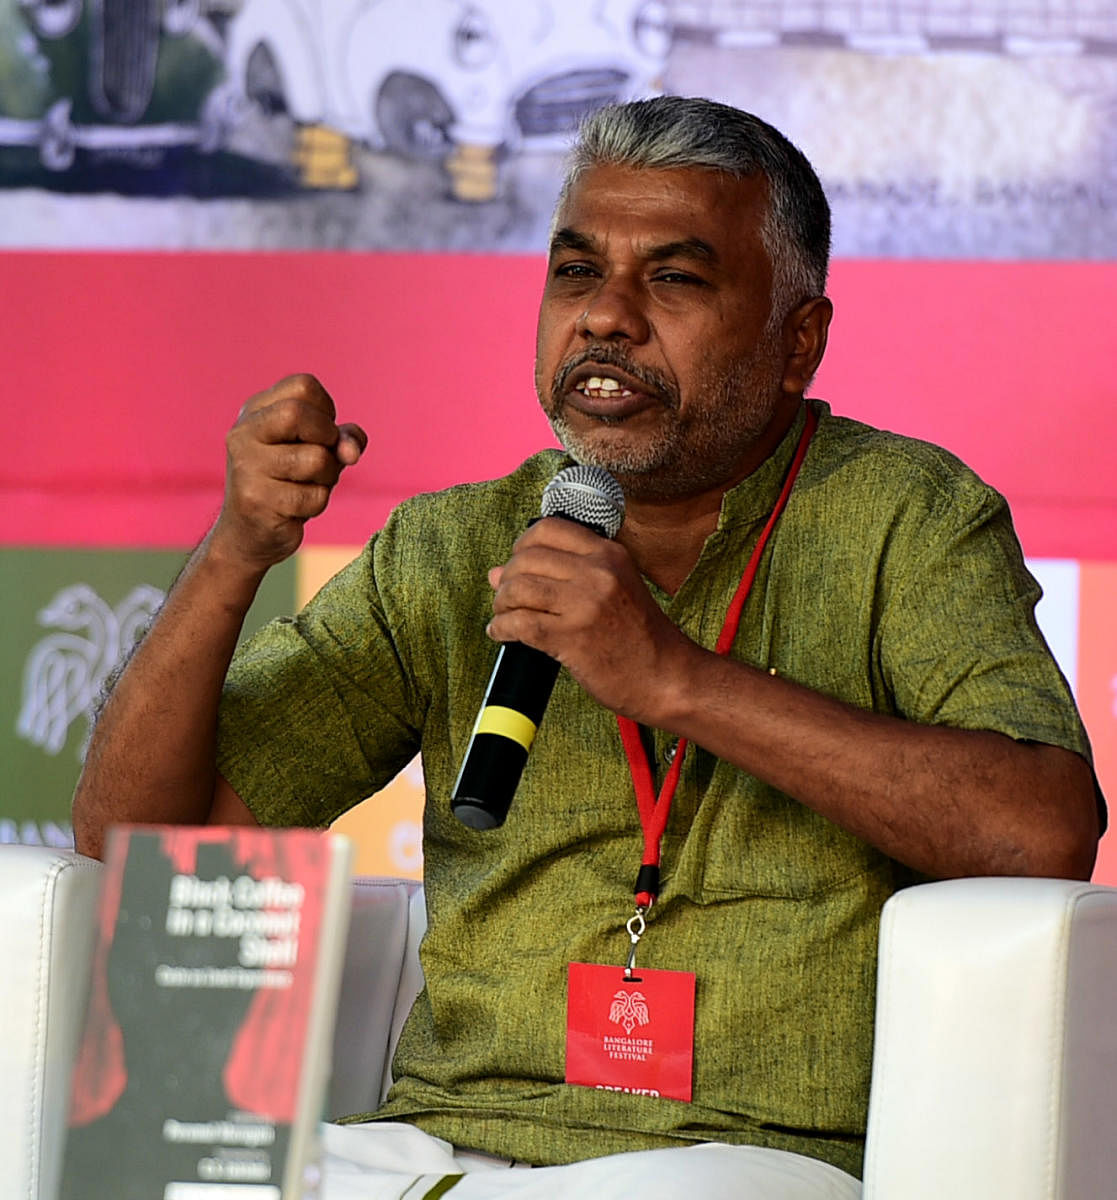 Murugan, who was a professor of Tamil at the Government Arts College in Namakkal, Tamil Nadu, spoke in Tamil.